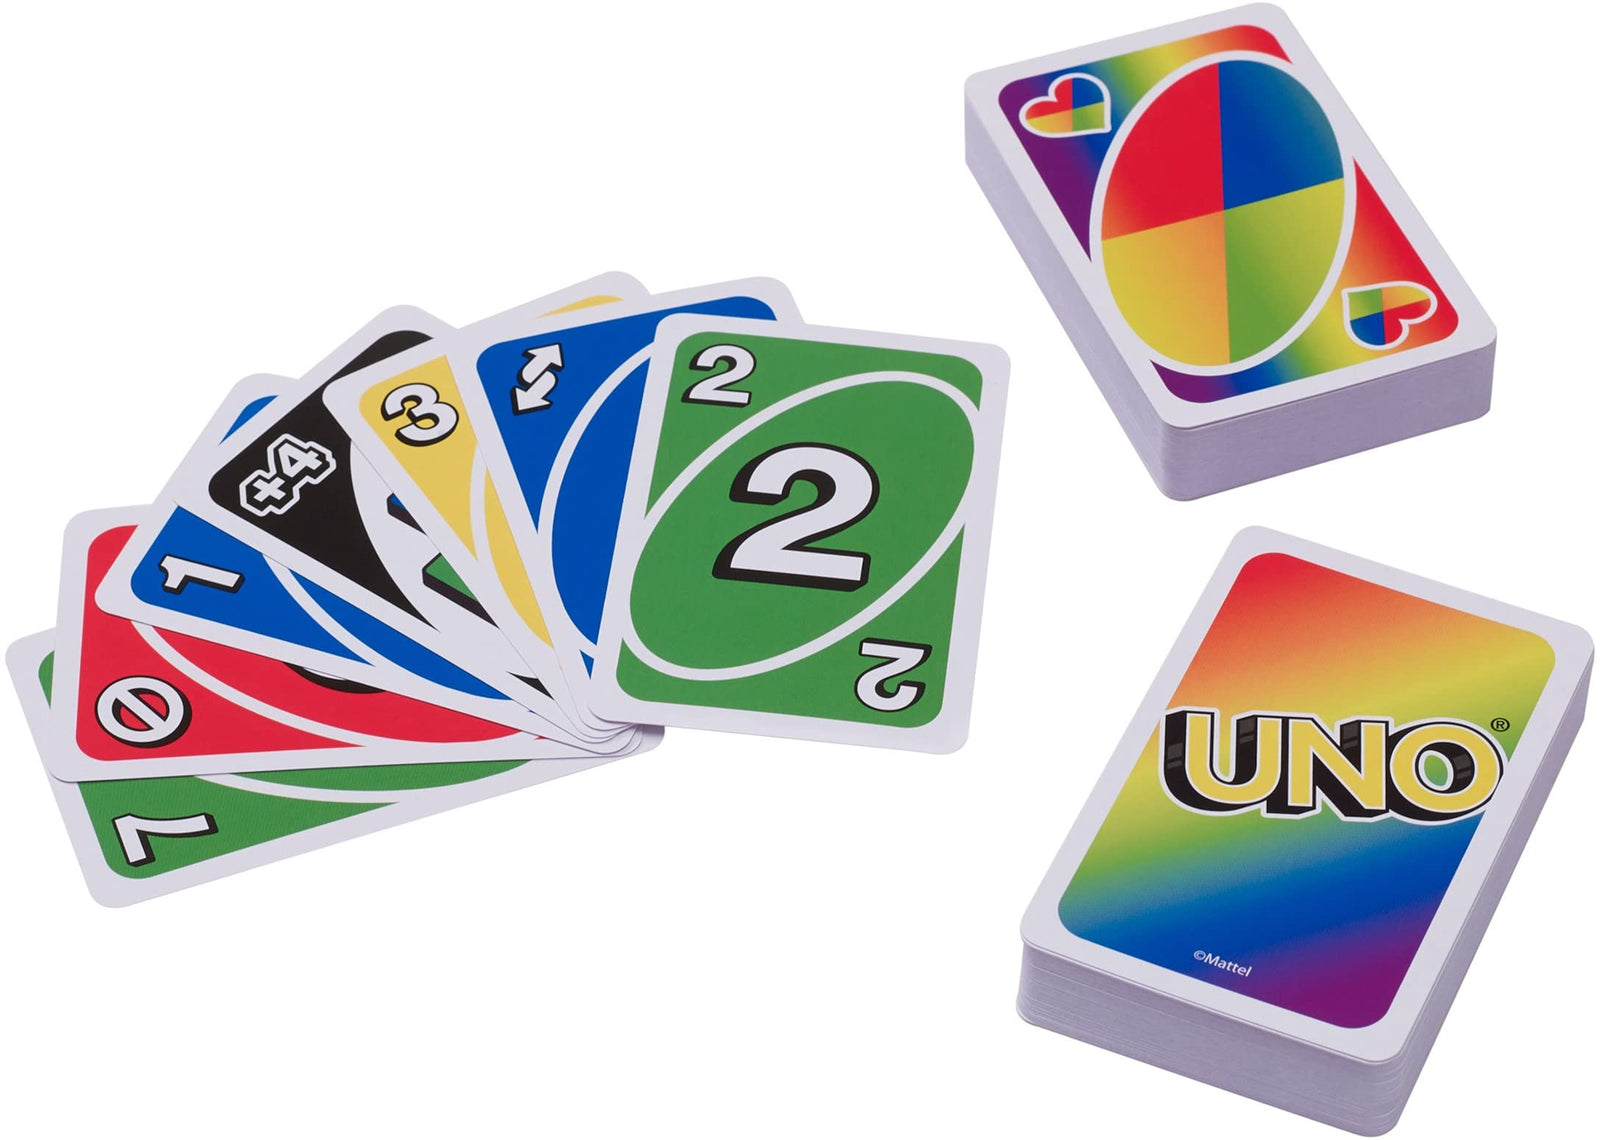 UNO Play with Pride Card Game with 112 Cards and Instructions, Great Gift for Ages 7 Years Old & Up